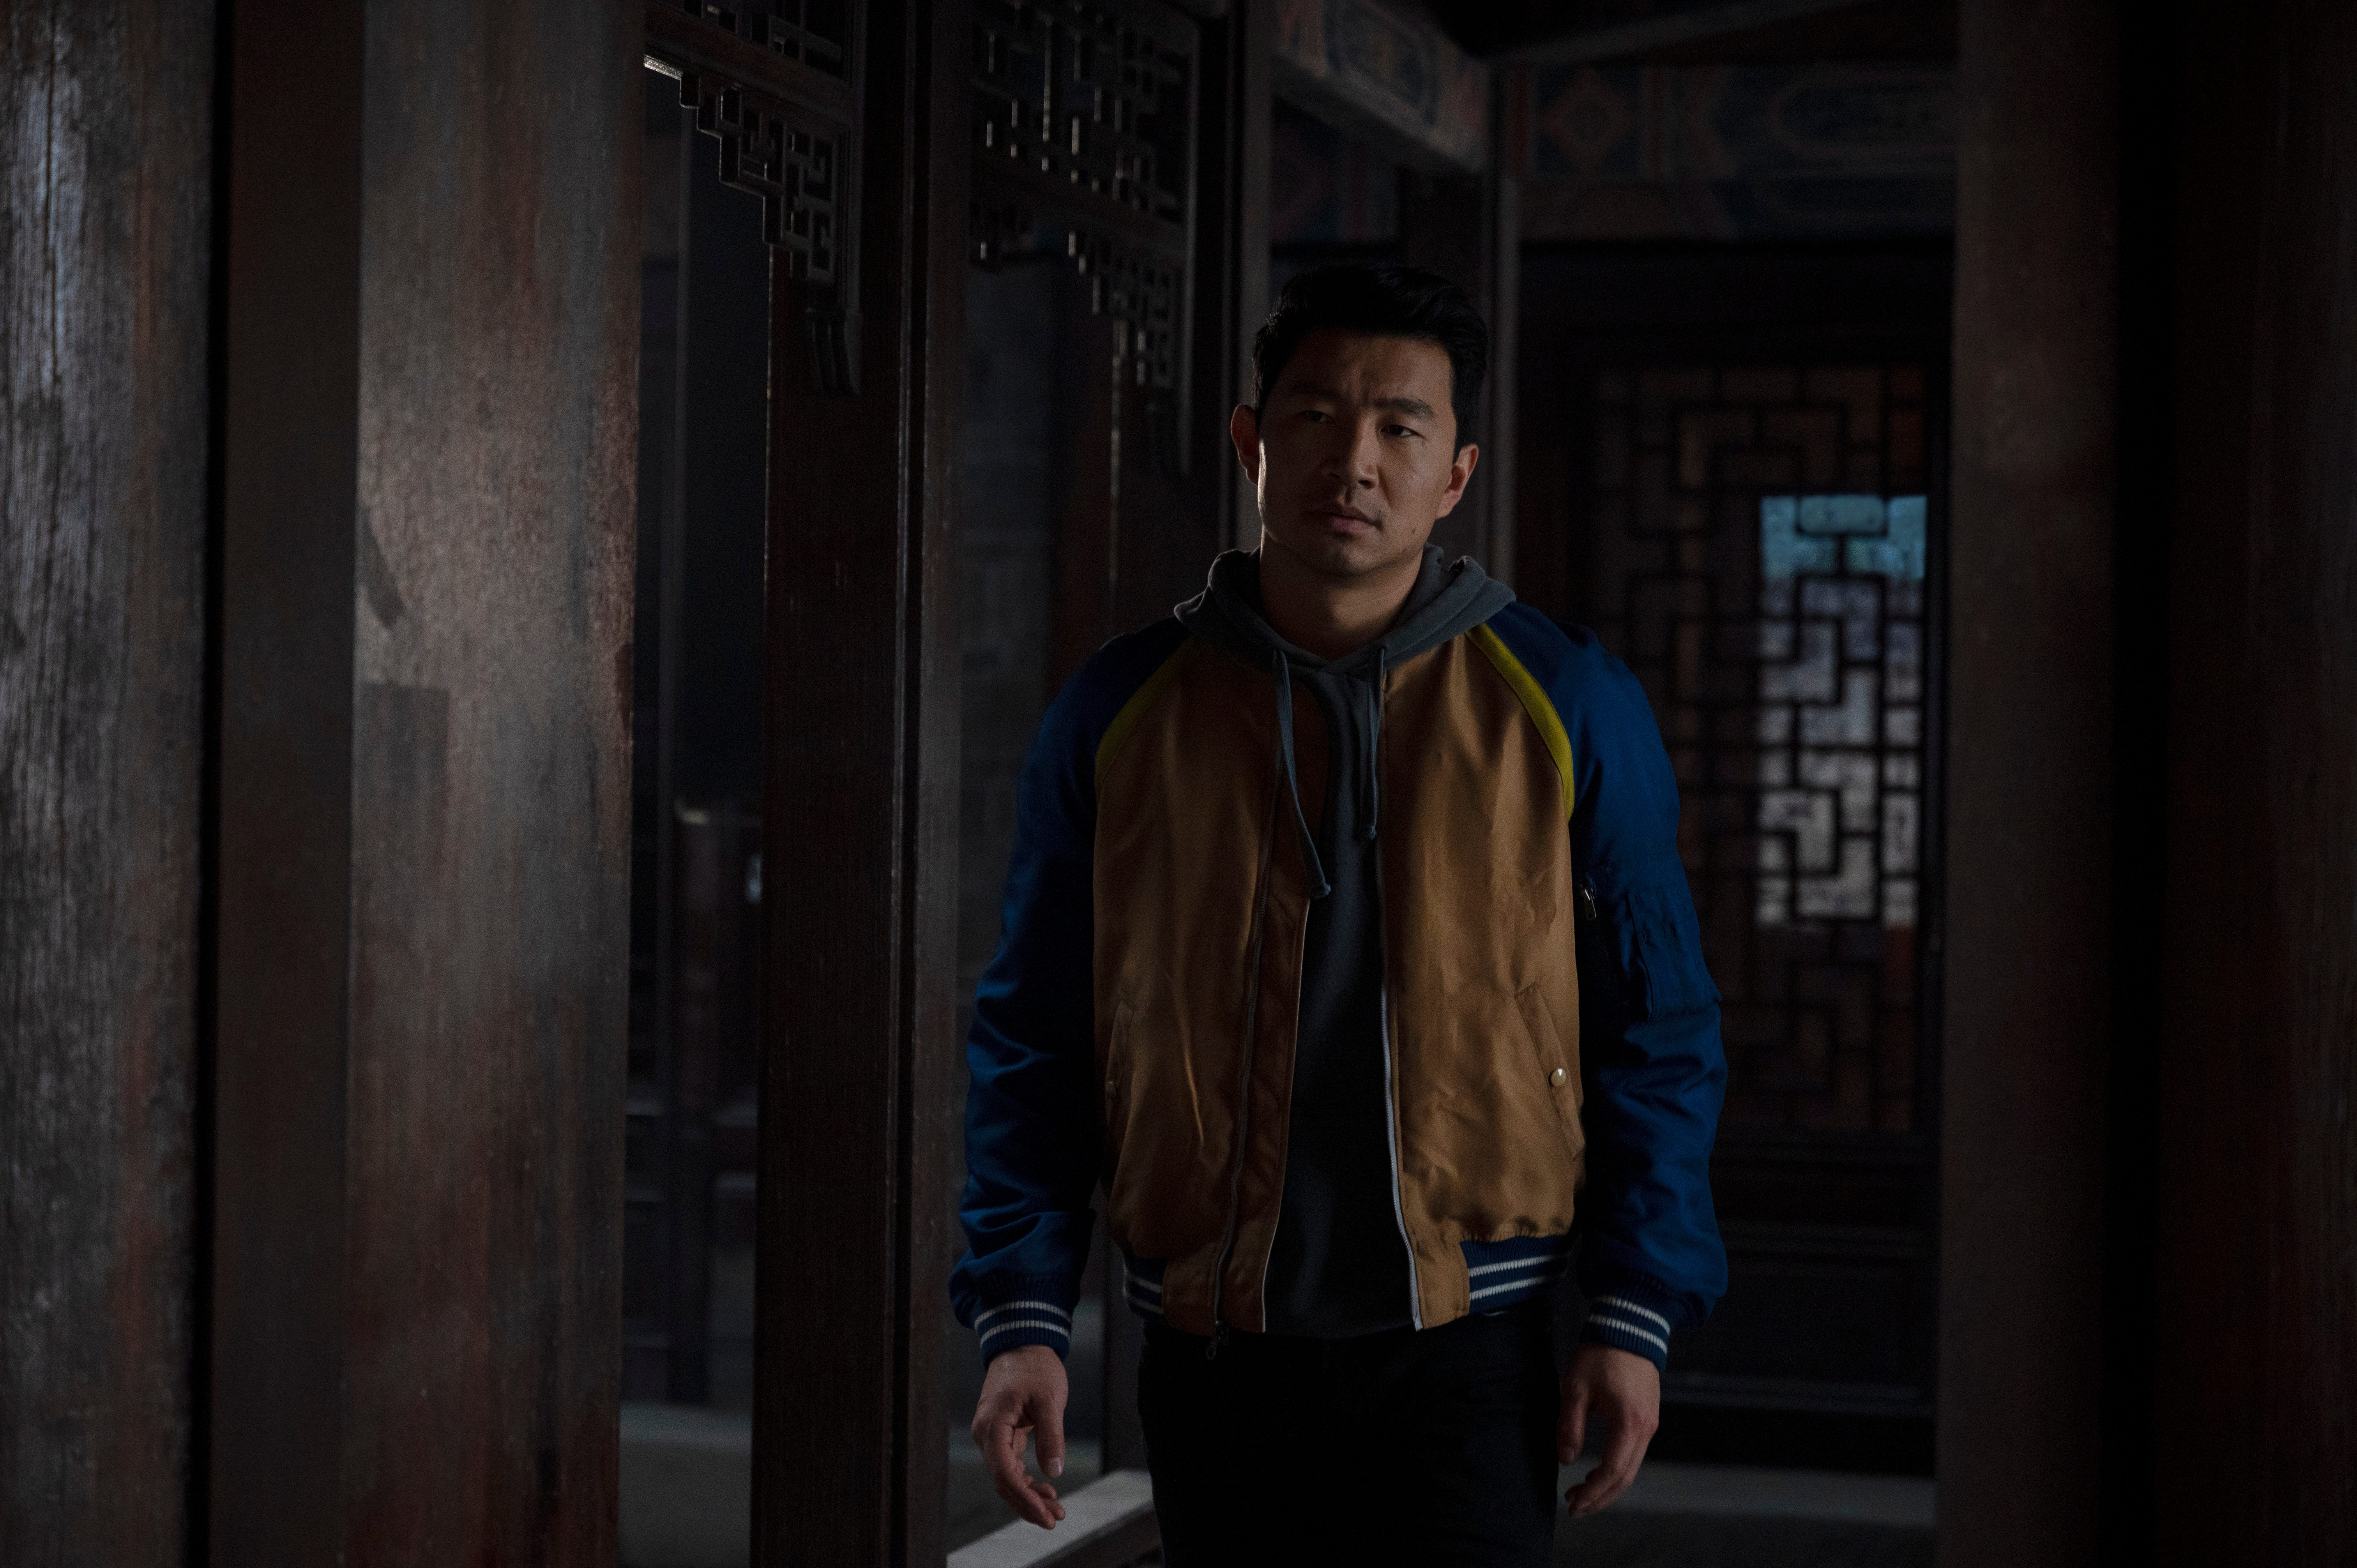 Asian-led ‘Shang-Chi’ battles for glory in Marvel’s film universe